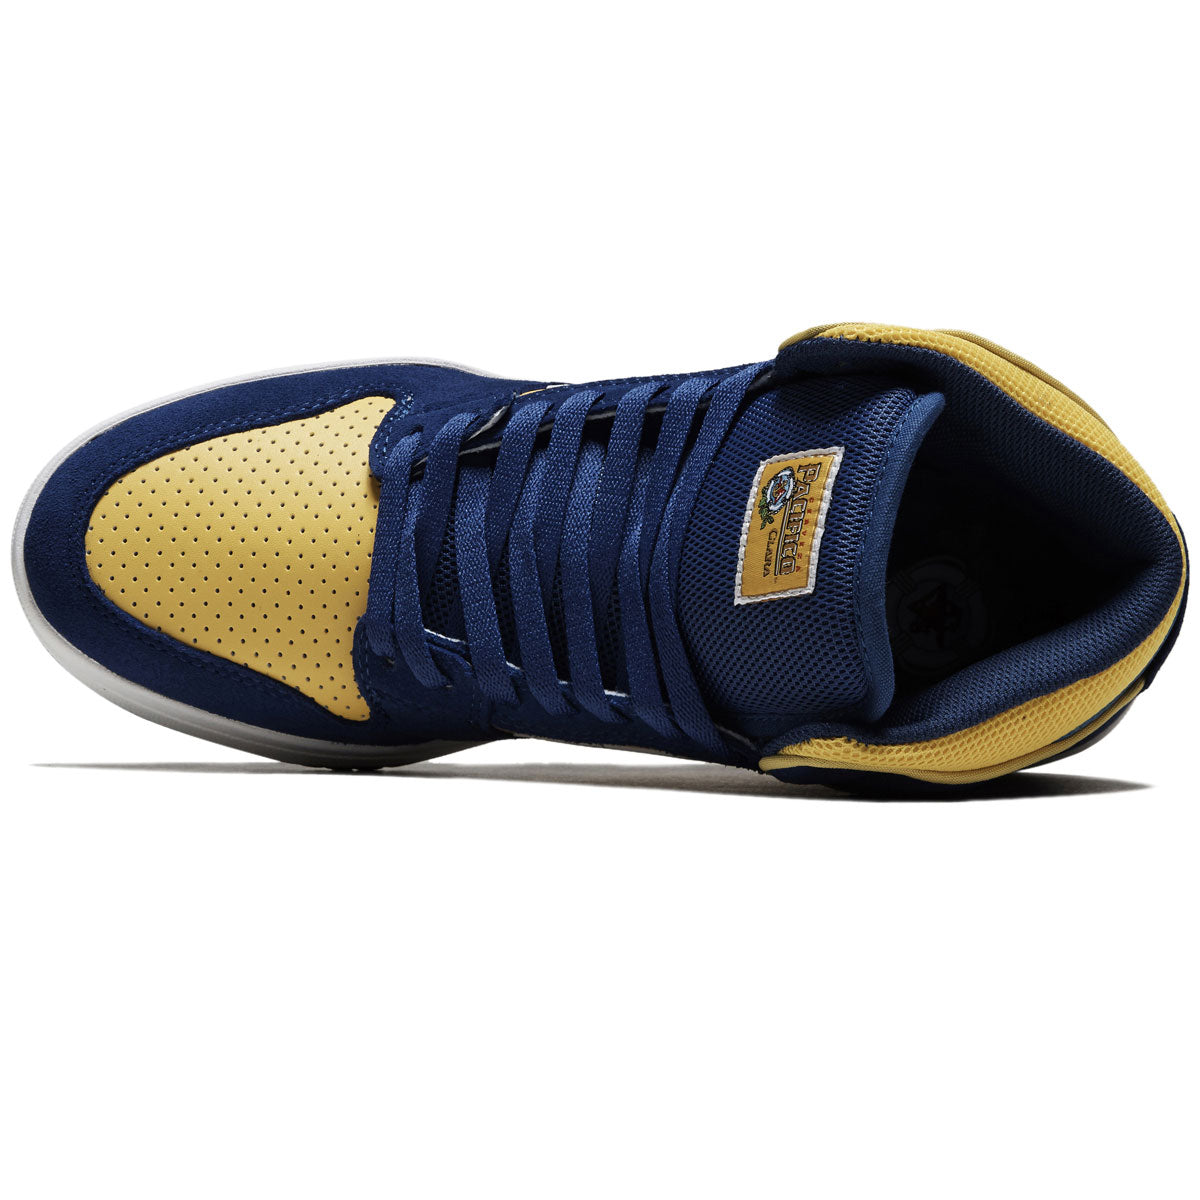 Lakai x Pacifico Telford Shoes - Blue/Yellow Suede image 3